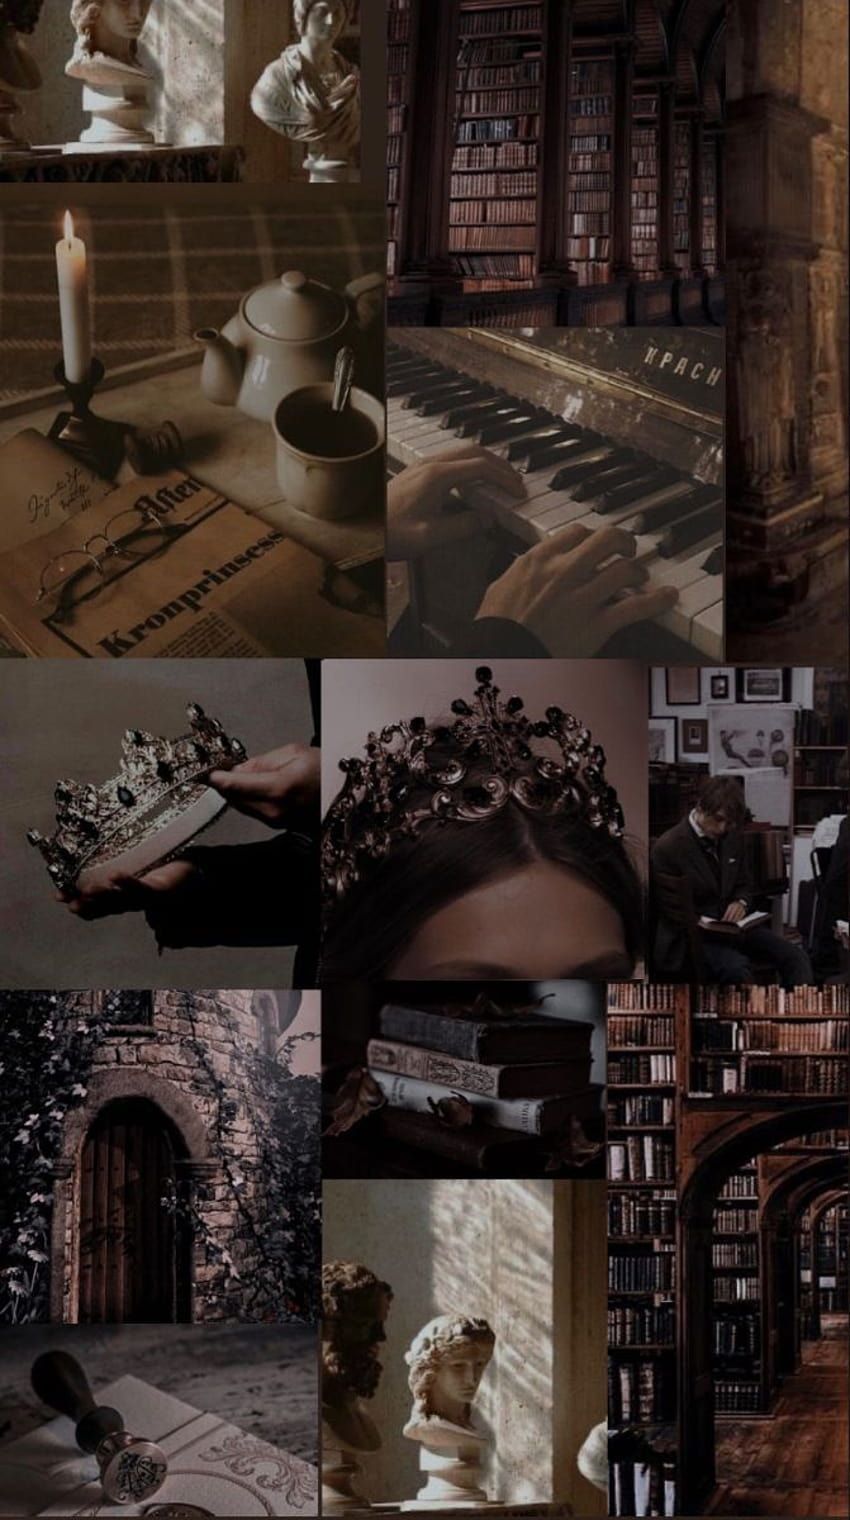 Aesthetic collage of a library, a book, a candle, a typewriter, a statue, a cup, a bookshelf, a bust, a chair, and a book. - Royalcore